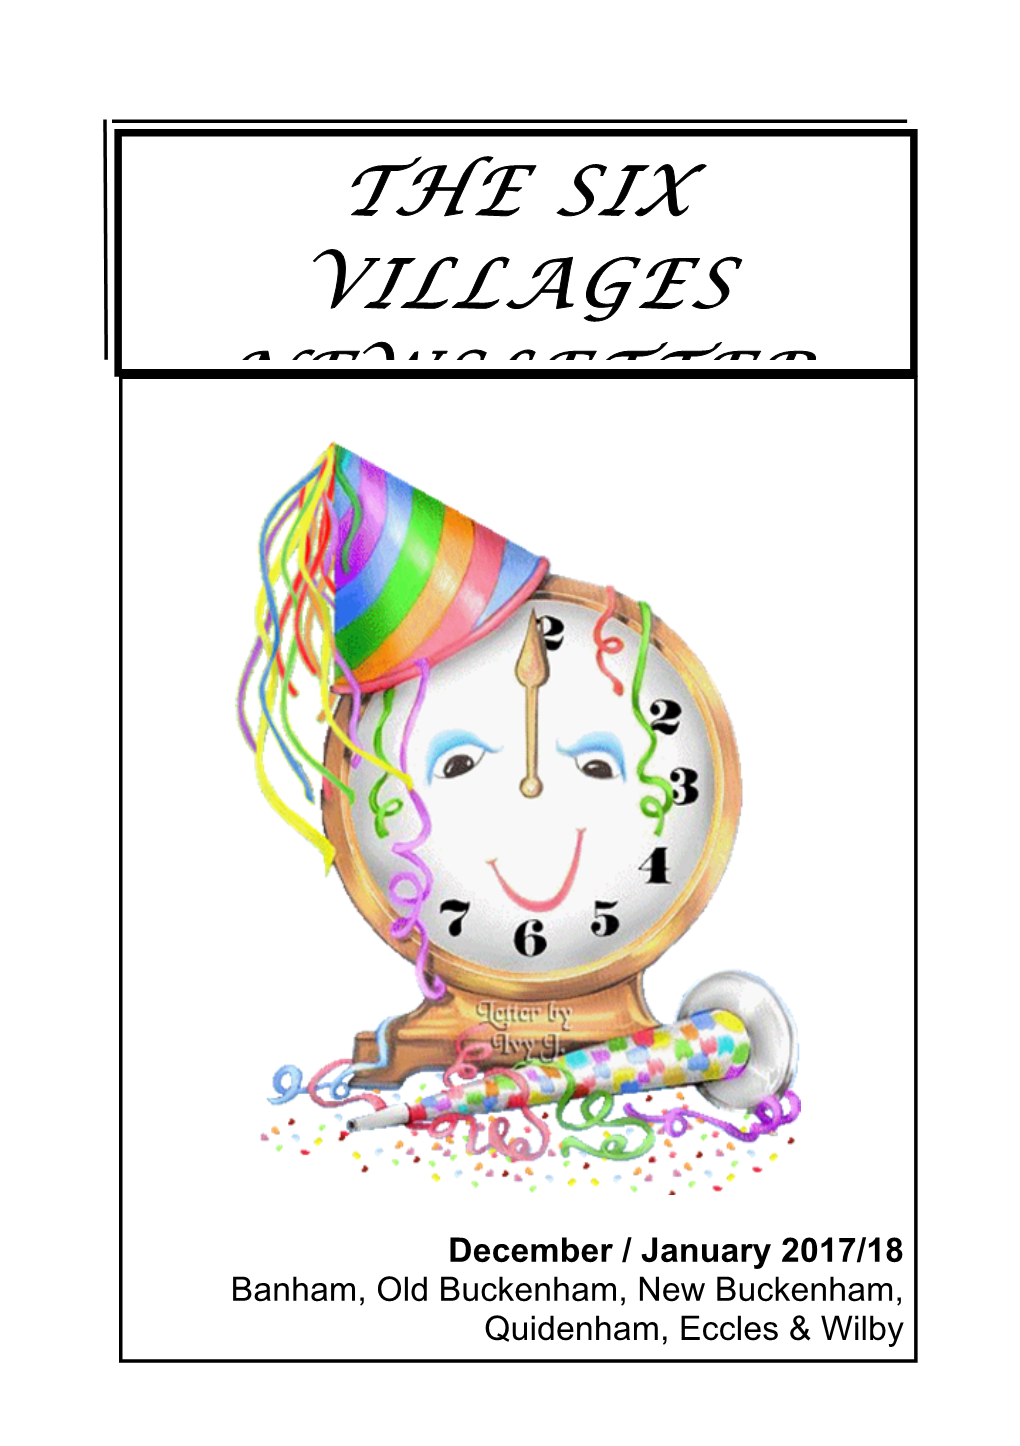 The Six Villages Newsletter